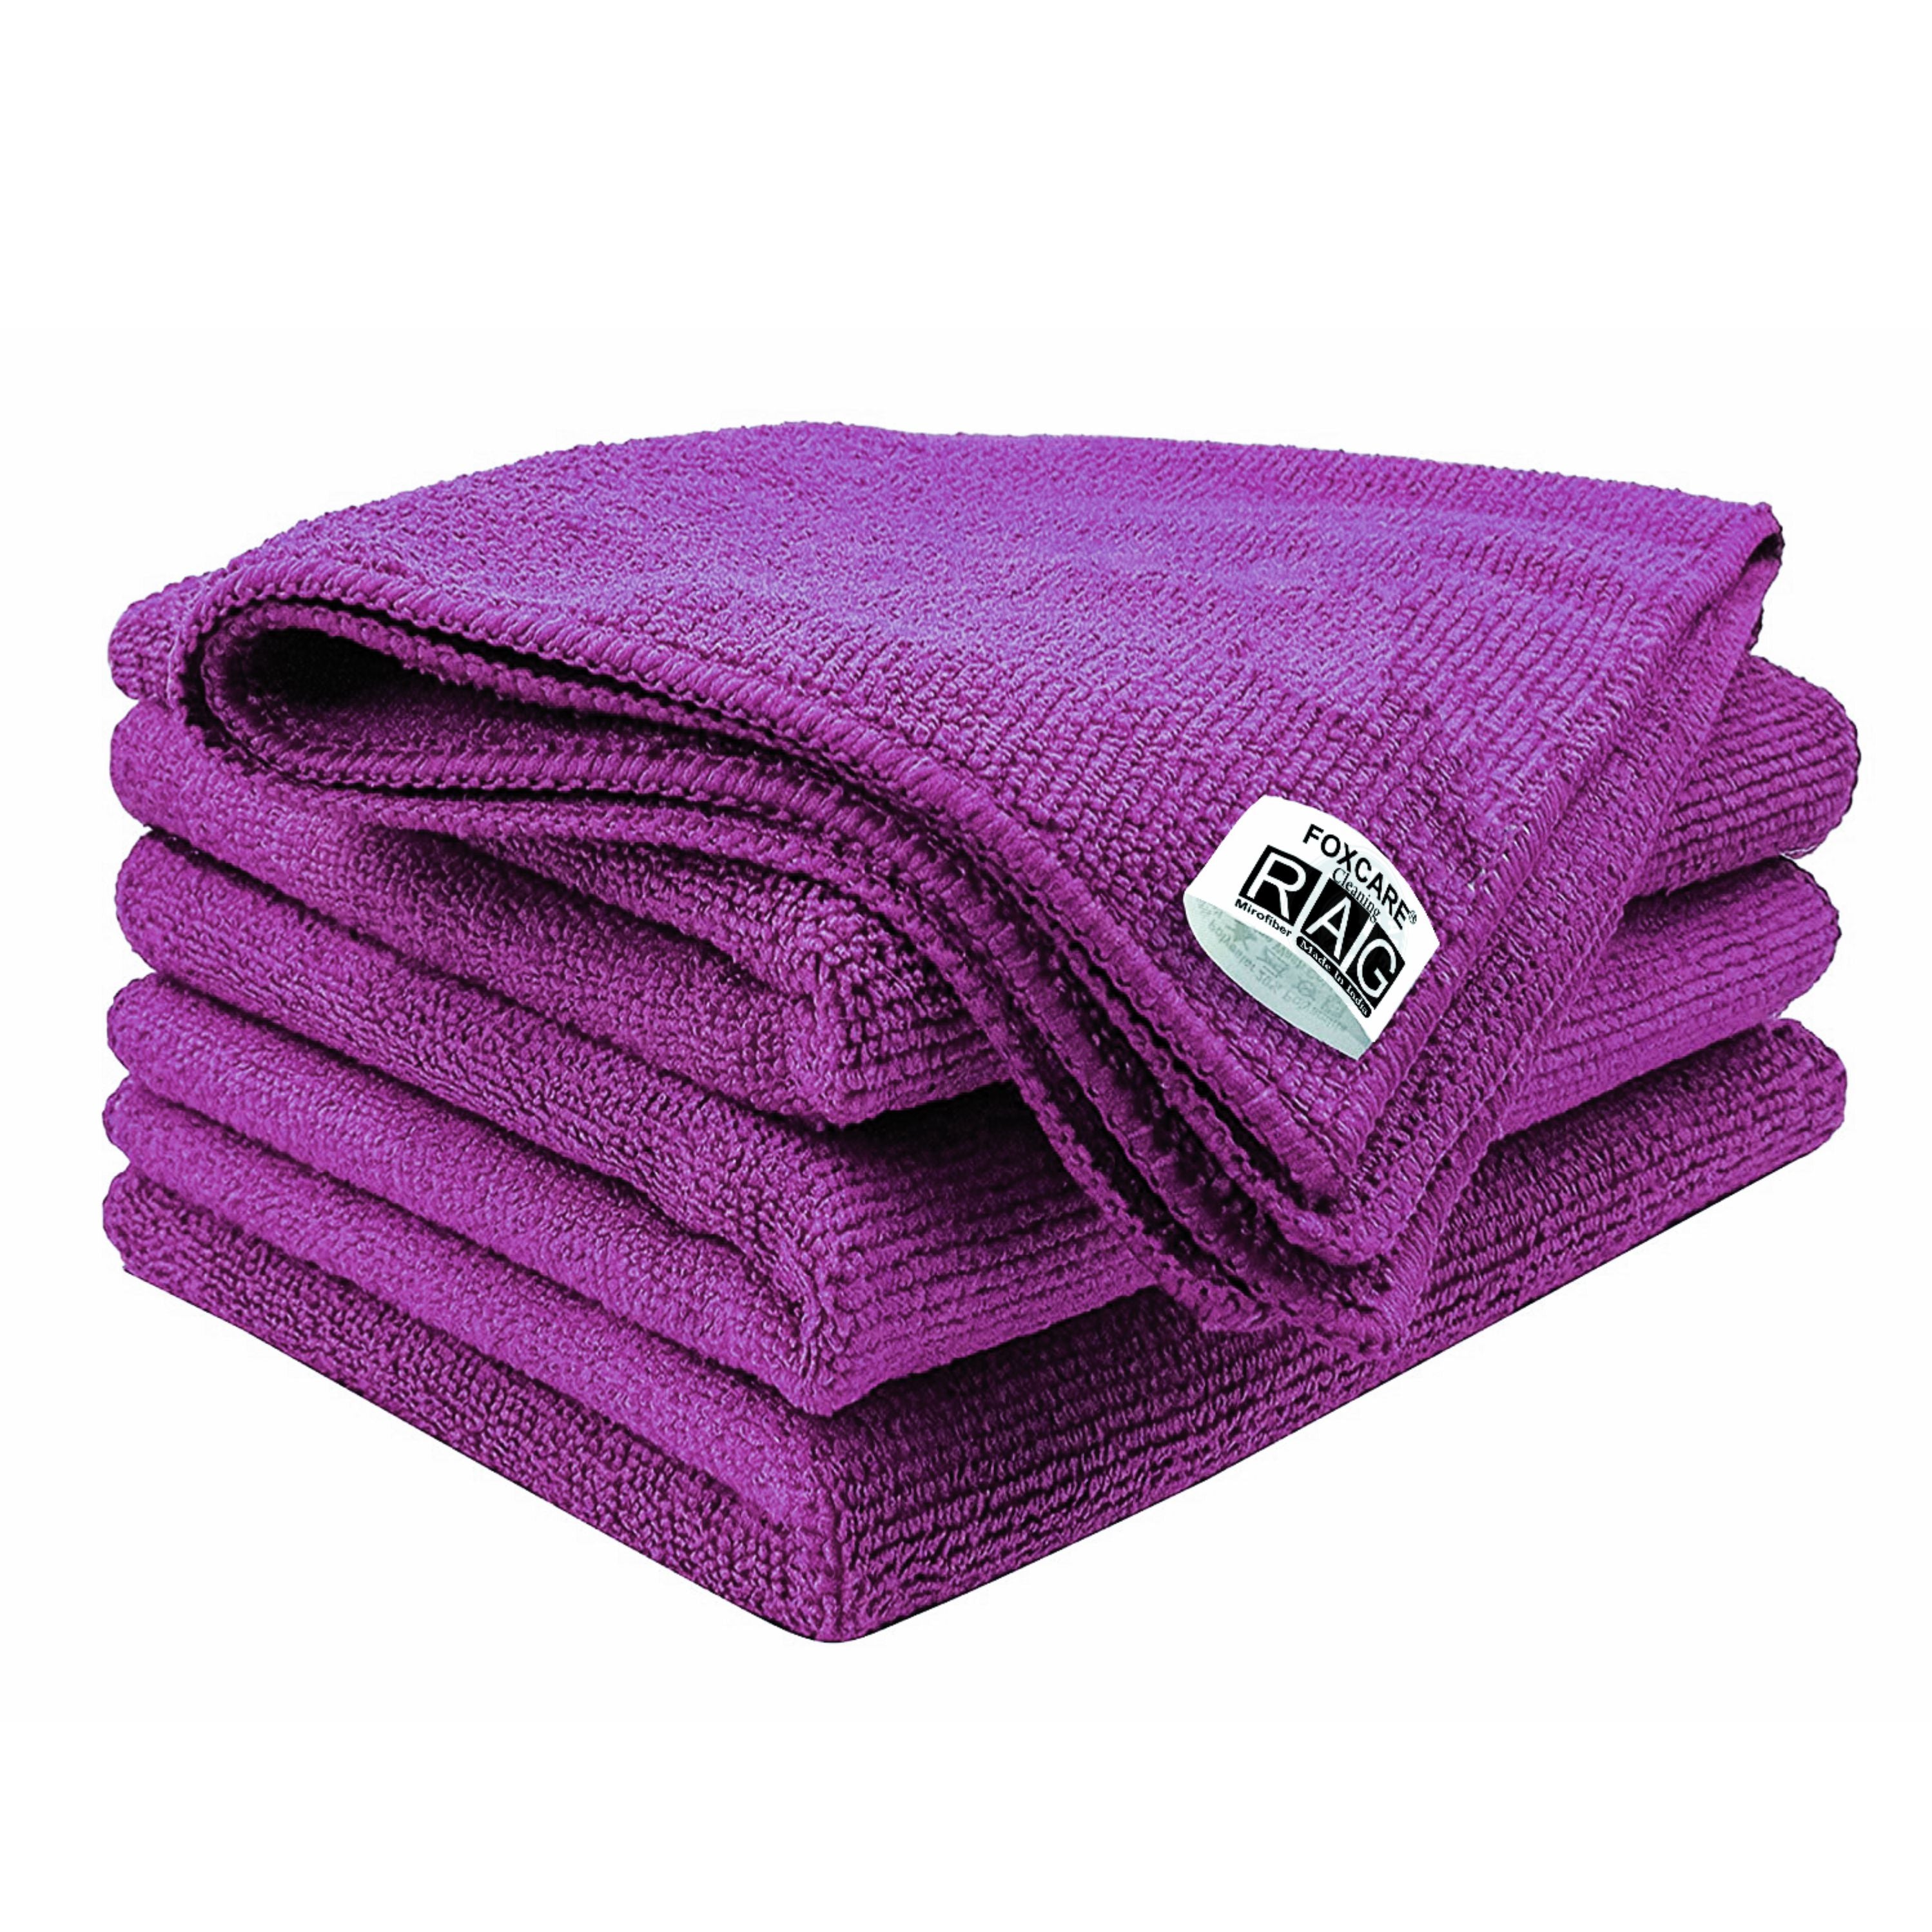 Foxcare Rag Purple Microfiber Cloth -  40x40 cms - 350 GSM - Thick Lint & Streak-Free Multipurpose Cloths -Automotive Microfibre Towels for Car Bike Cleaning Polishing Washing & Detailing